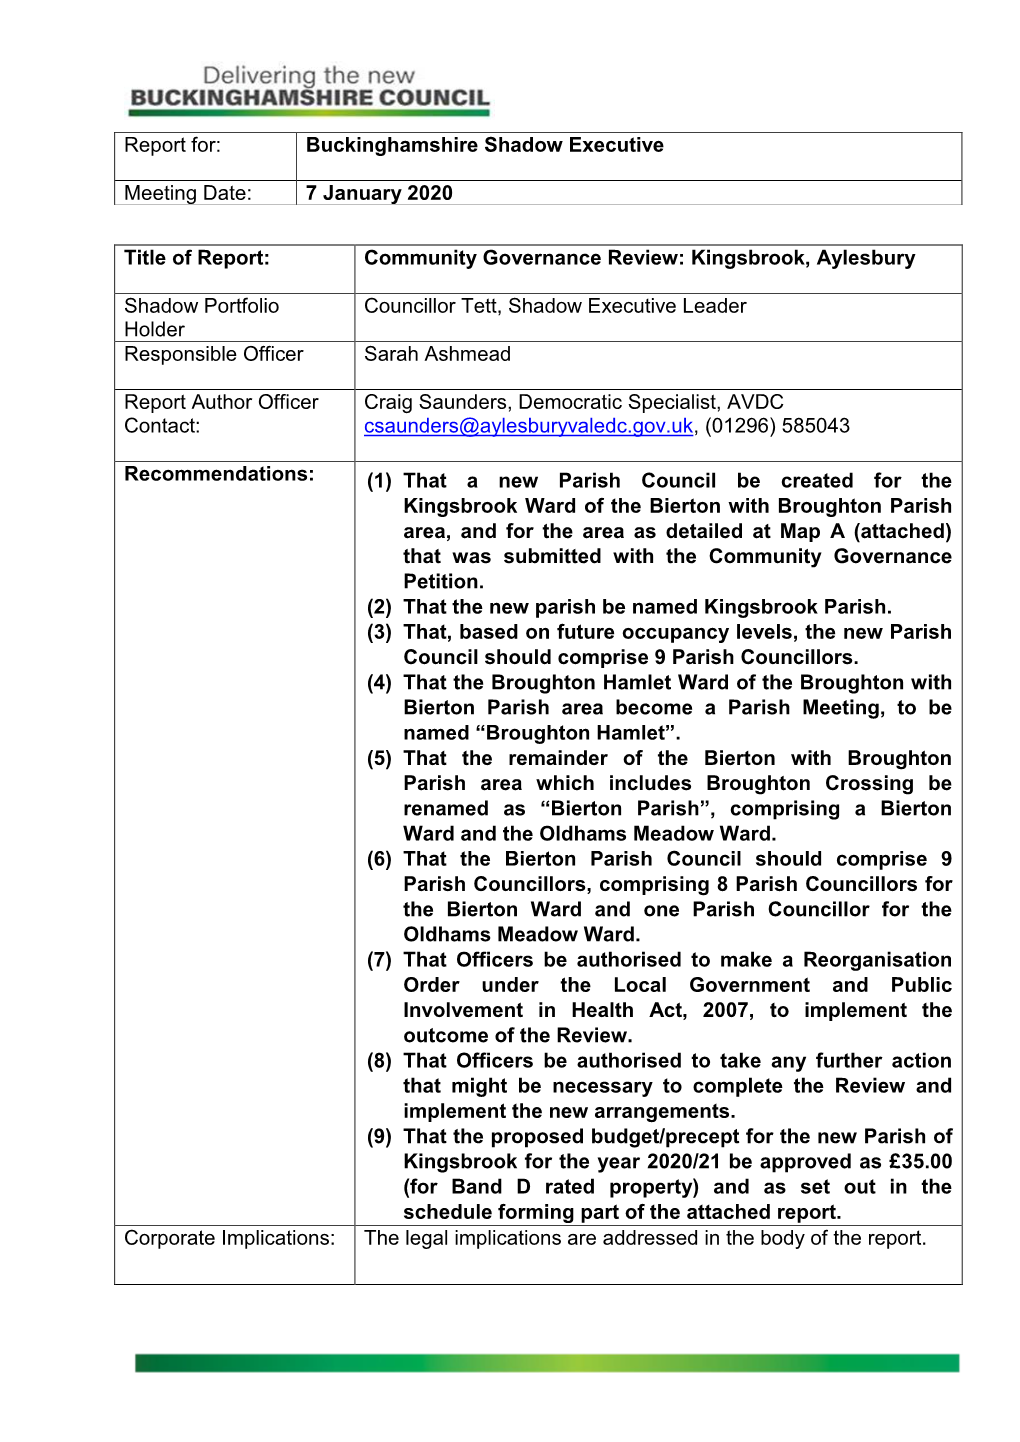 Title of Report: Community Governance Review: Kingsbrook, Aylesbury